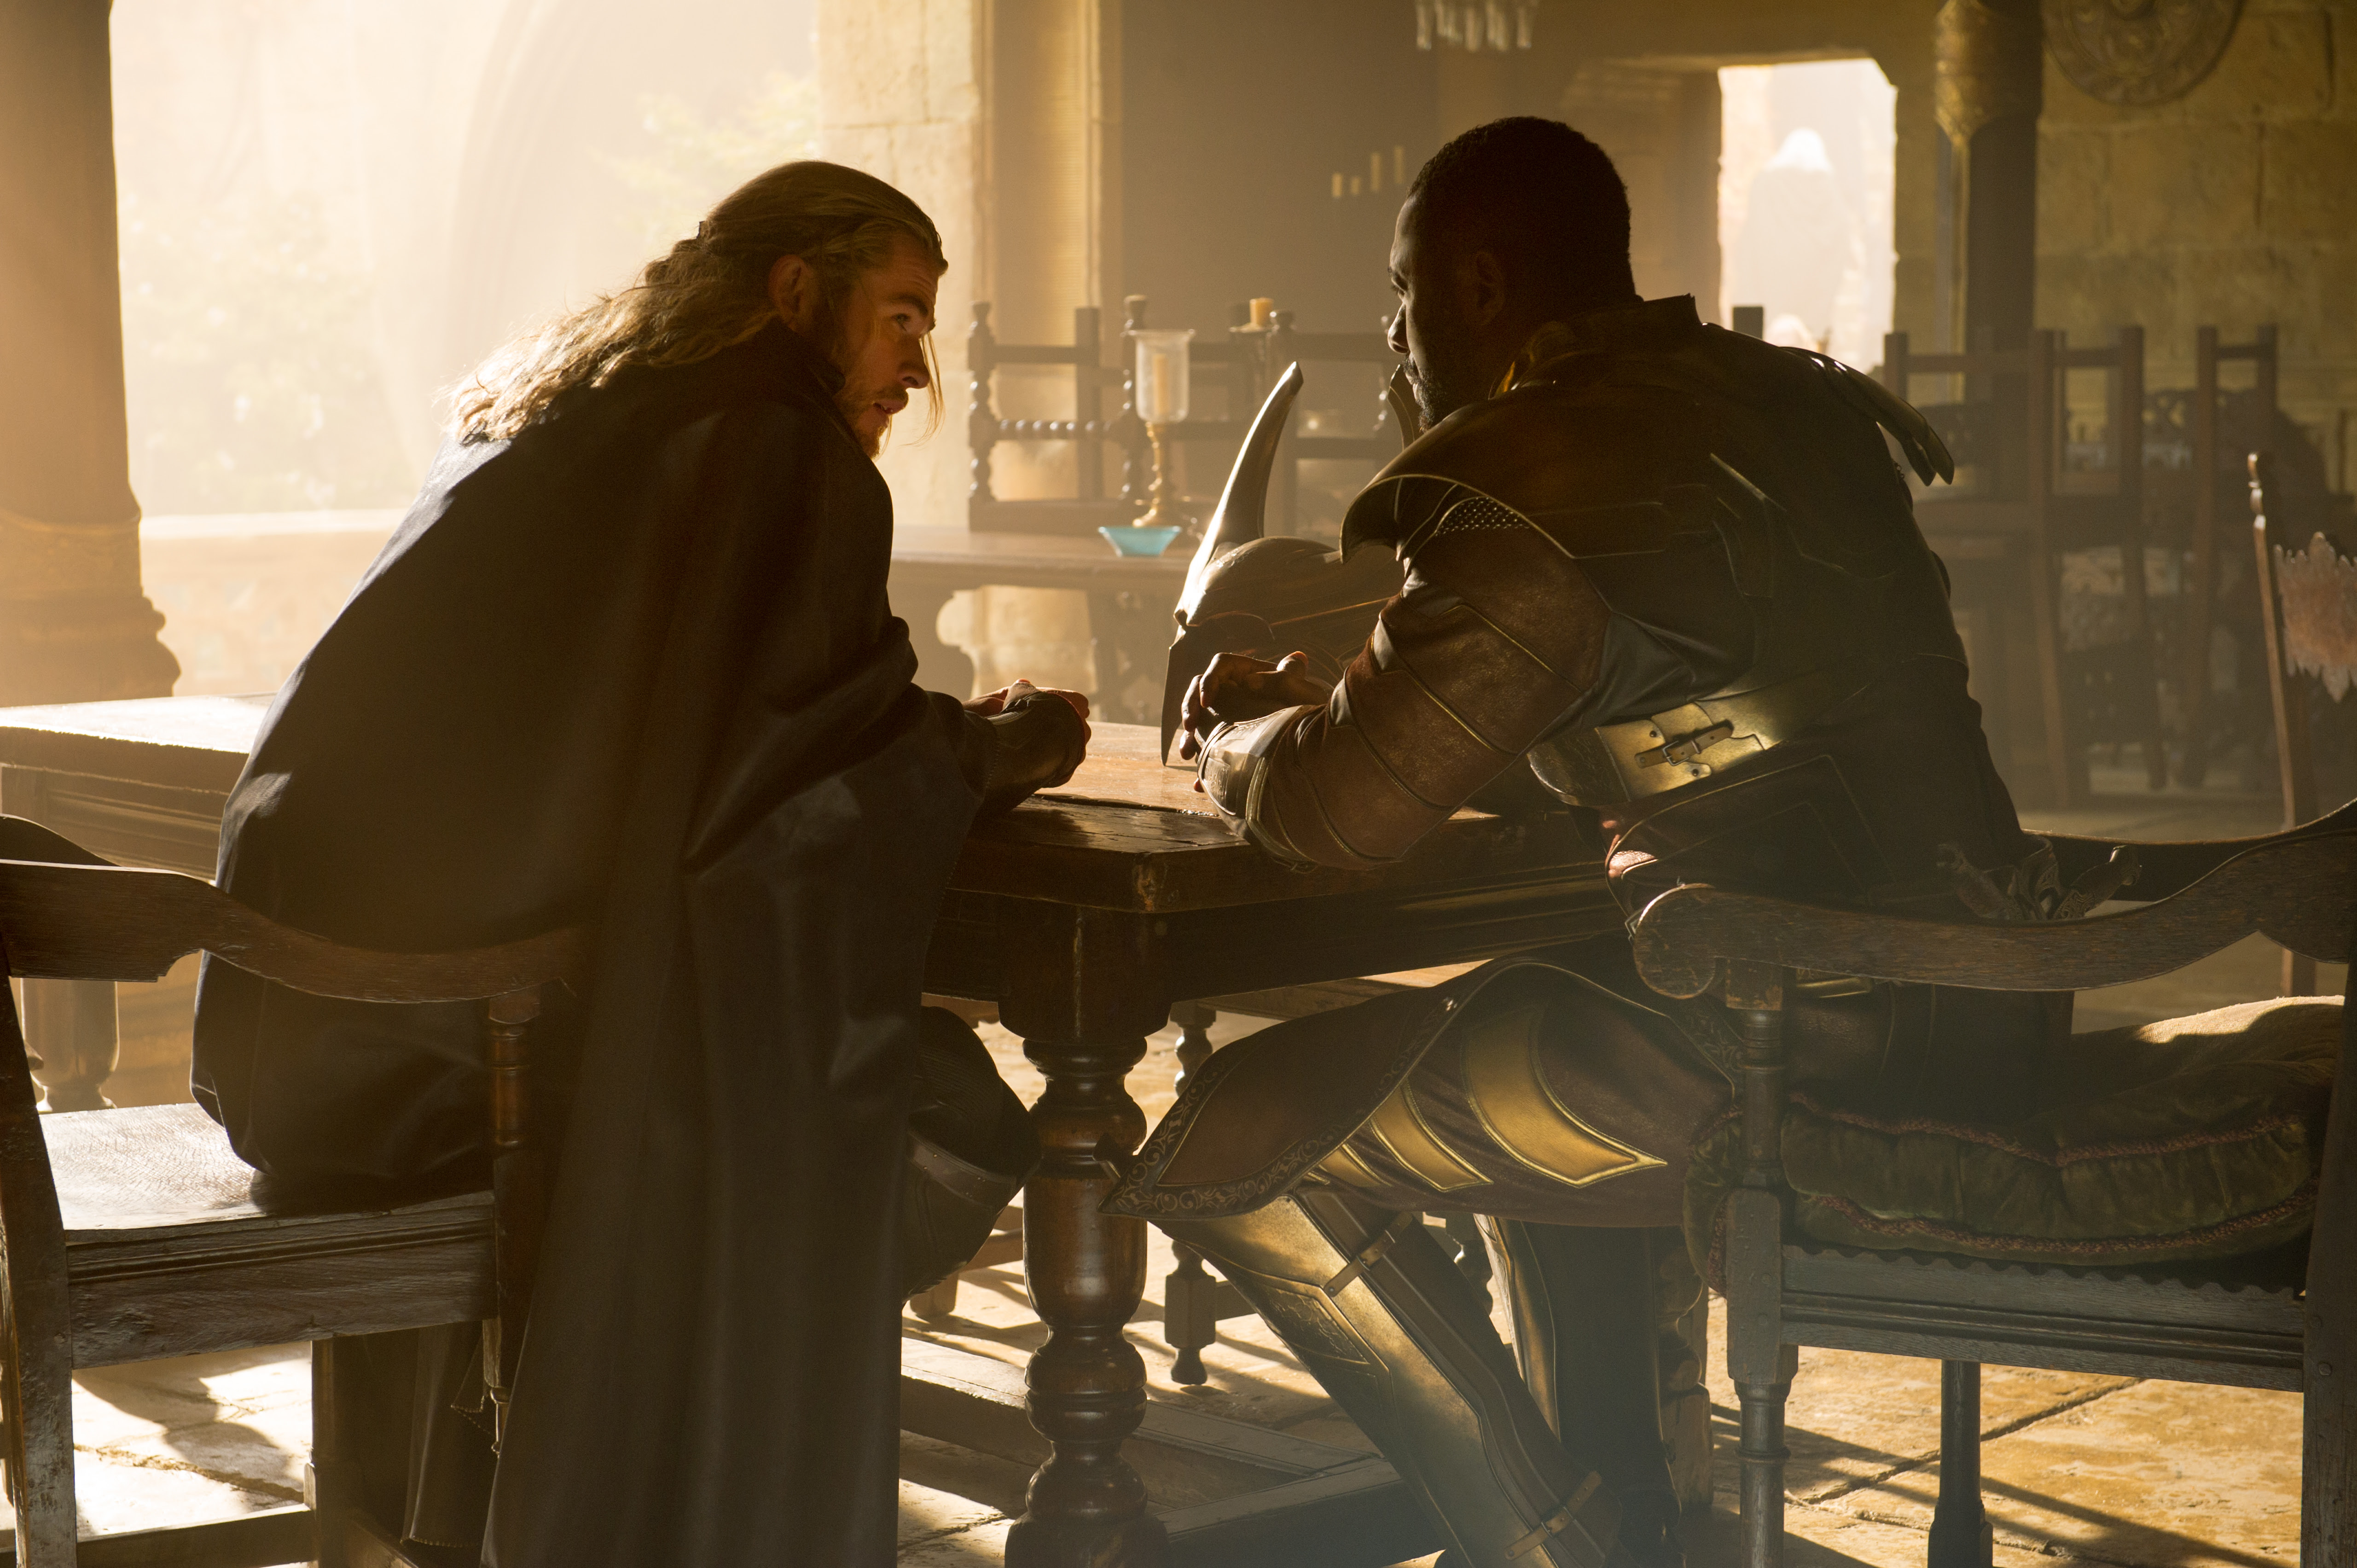 http://vignette2.wikia.nocookie.net/marvelcinematicuniverse/images/f/fe/Thor_Heimdall.jpg/revision/latest?cb=20130909100827